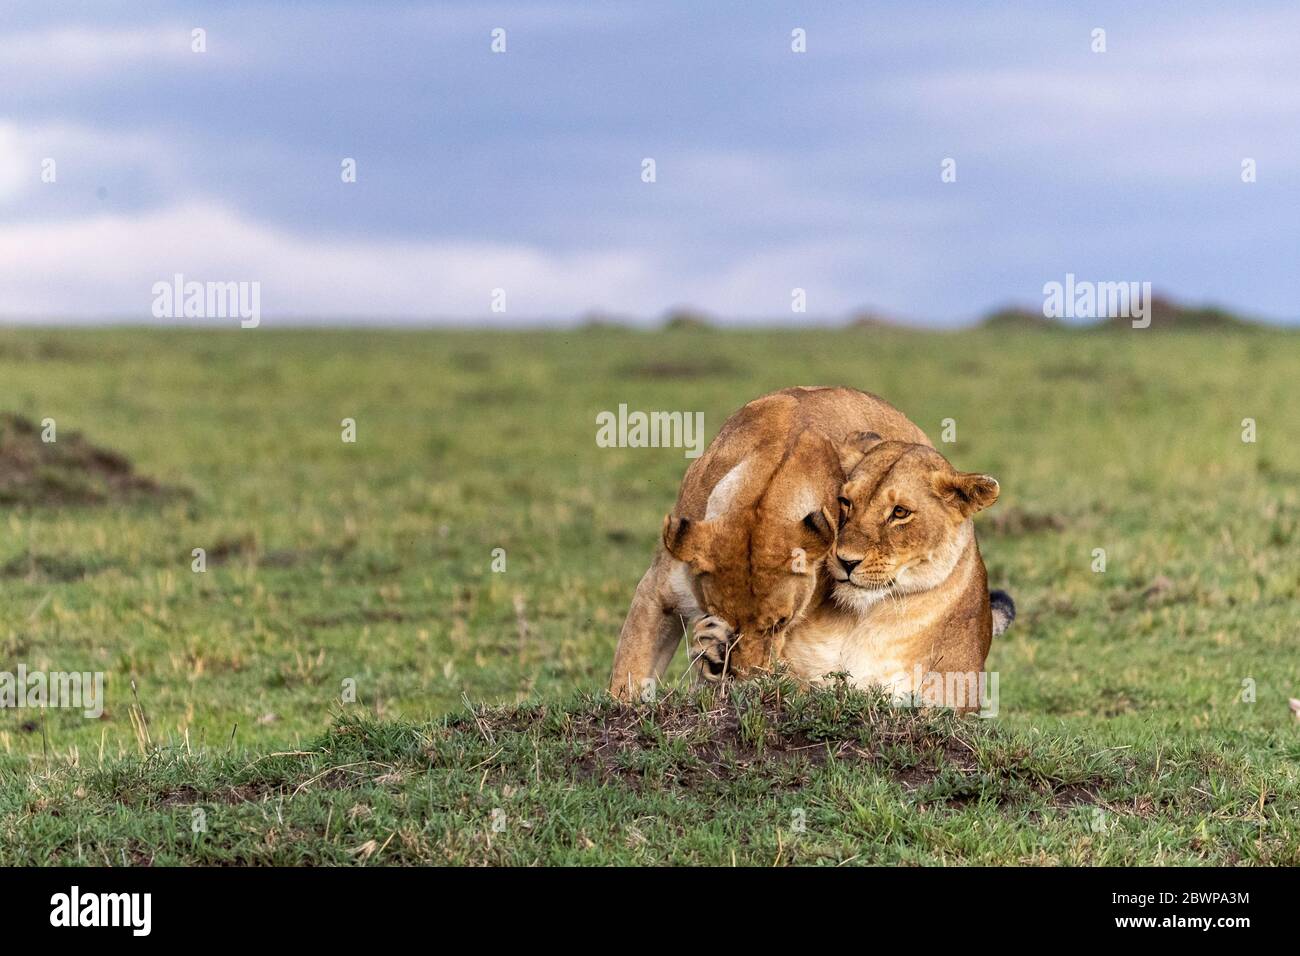 Two adult African lioness showing affection to each other in the Mara Triangle Conservancy Triangle, Kenya Africa Stock Photo